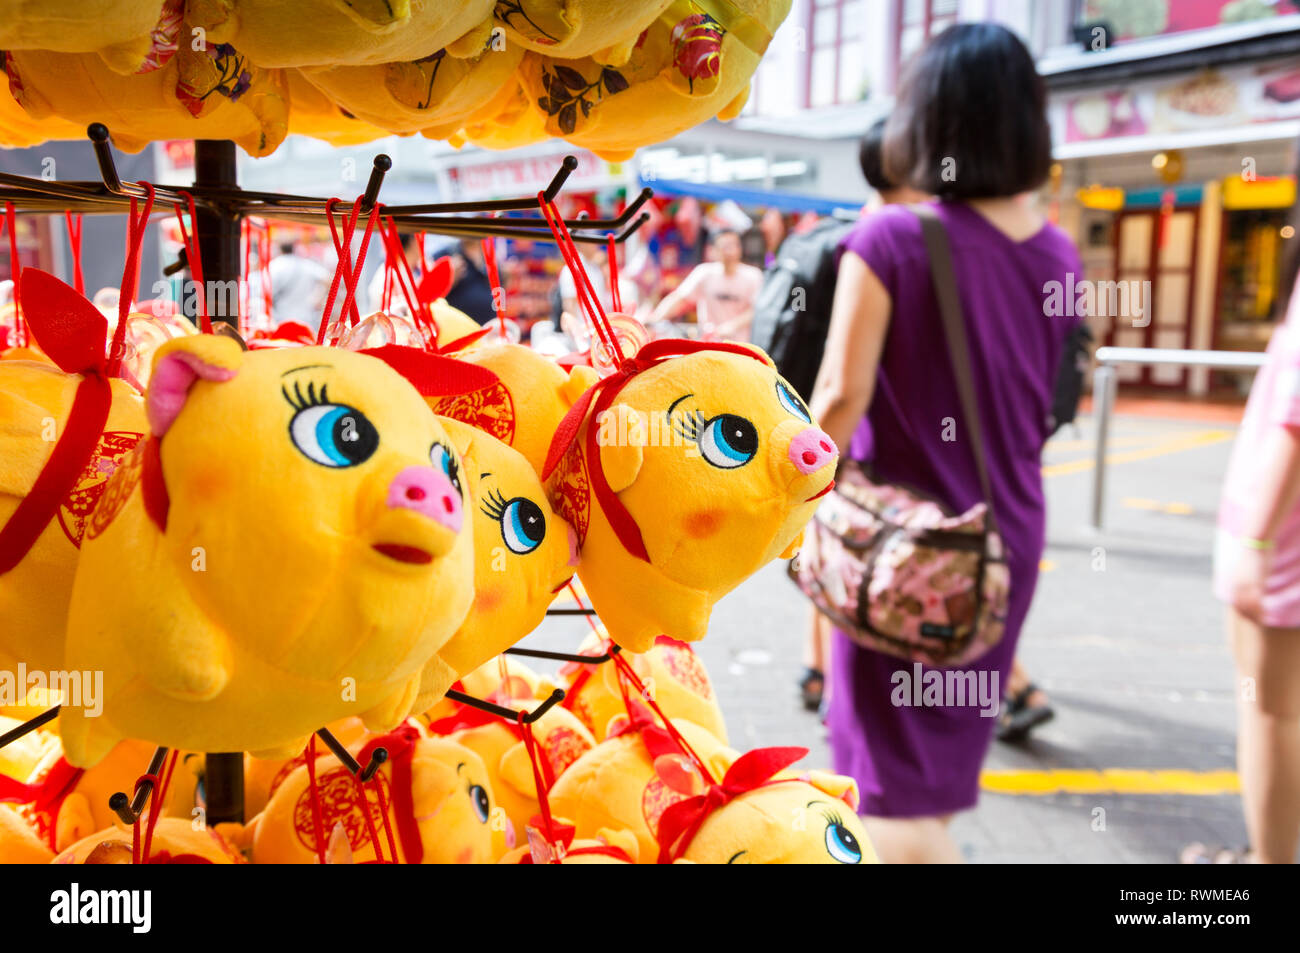 Toy pigs on sale in a market, Chinatown, Singapore, during the Chinese New Year 2019 Stock Photo